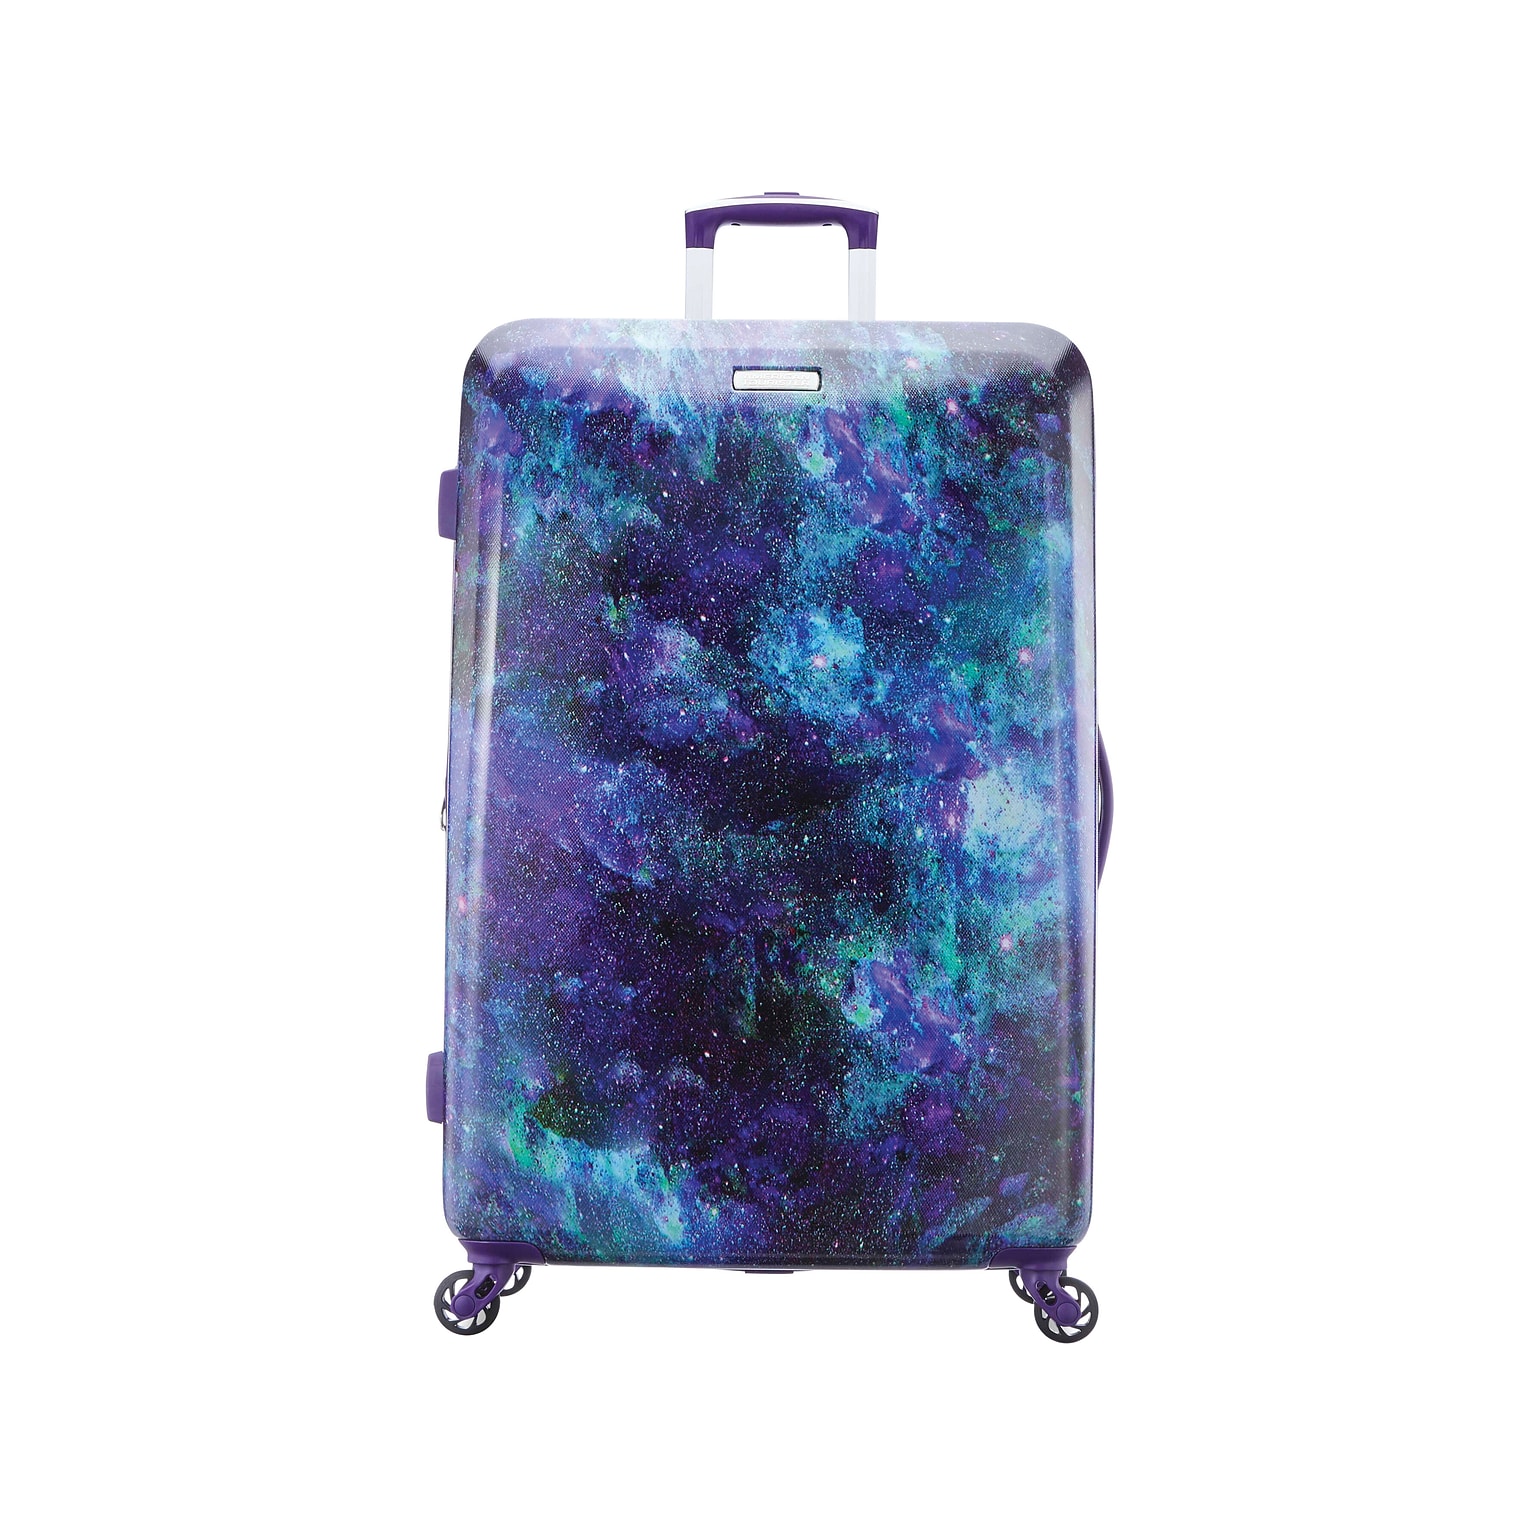 American Tourister Moonlight 31.9 Hardside Moonlight Suitcase, 4-Wheeled Spinner, Cosmos (92506-6418)